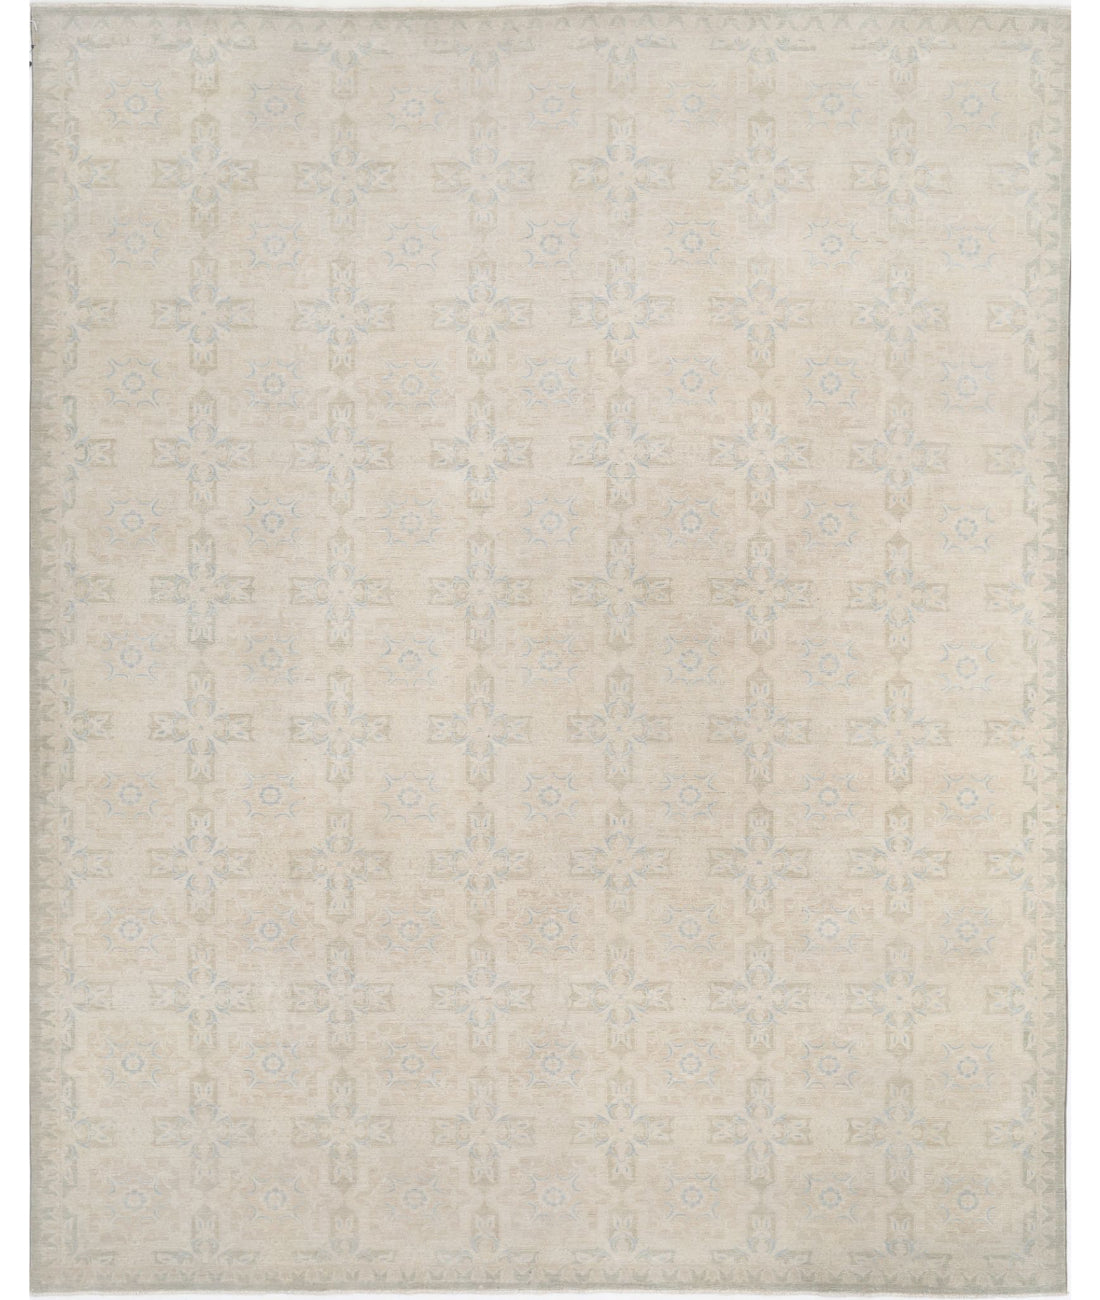 Hand Knotted Serenity Wool Rug - 12&#39;2&#39;&#39; x 14&#39;10&#39;&#39; 12&#39;2&#39;&#39; x 14&#39;10&#39;&#39; (365 X 445) / Ivory / Green